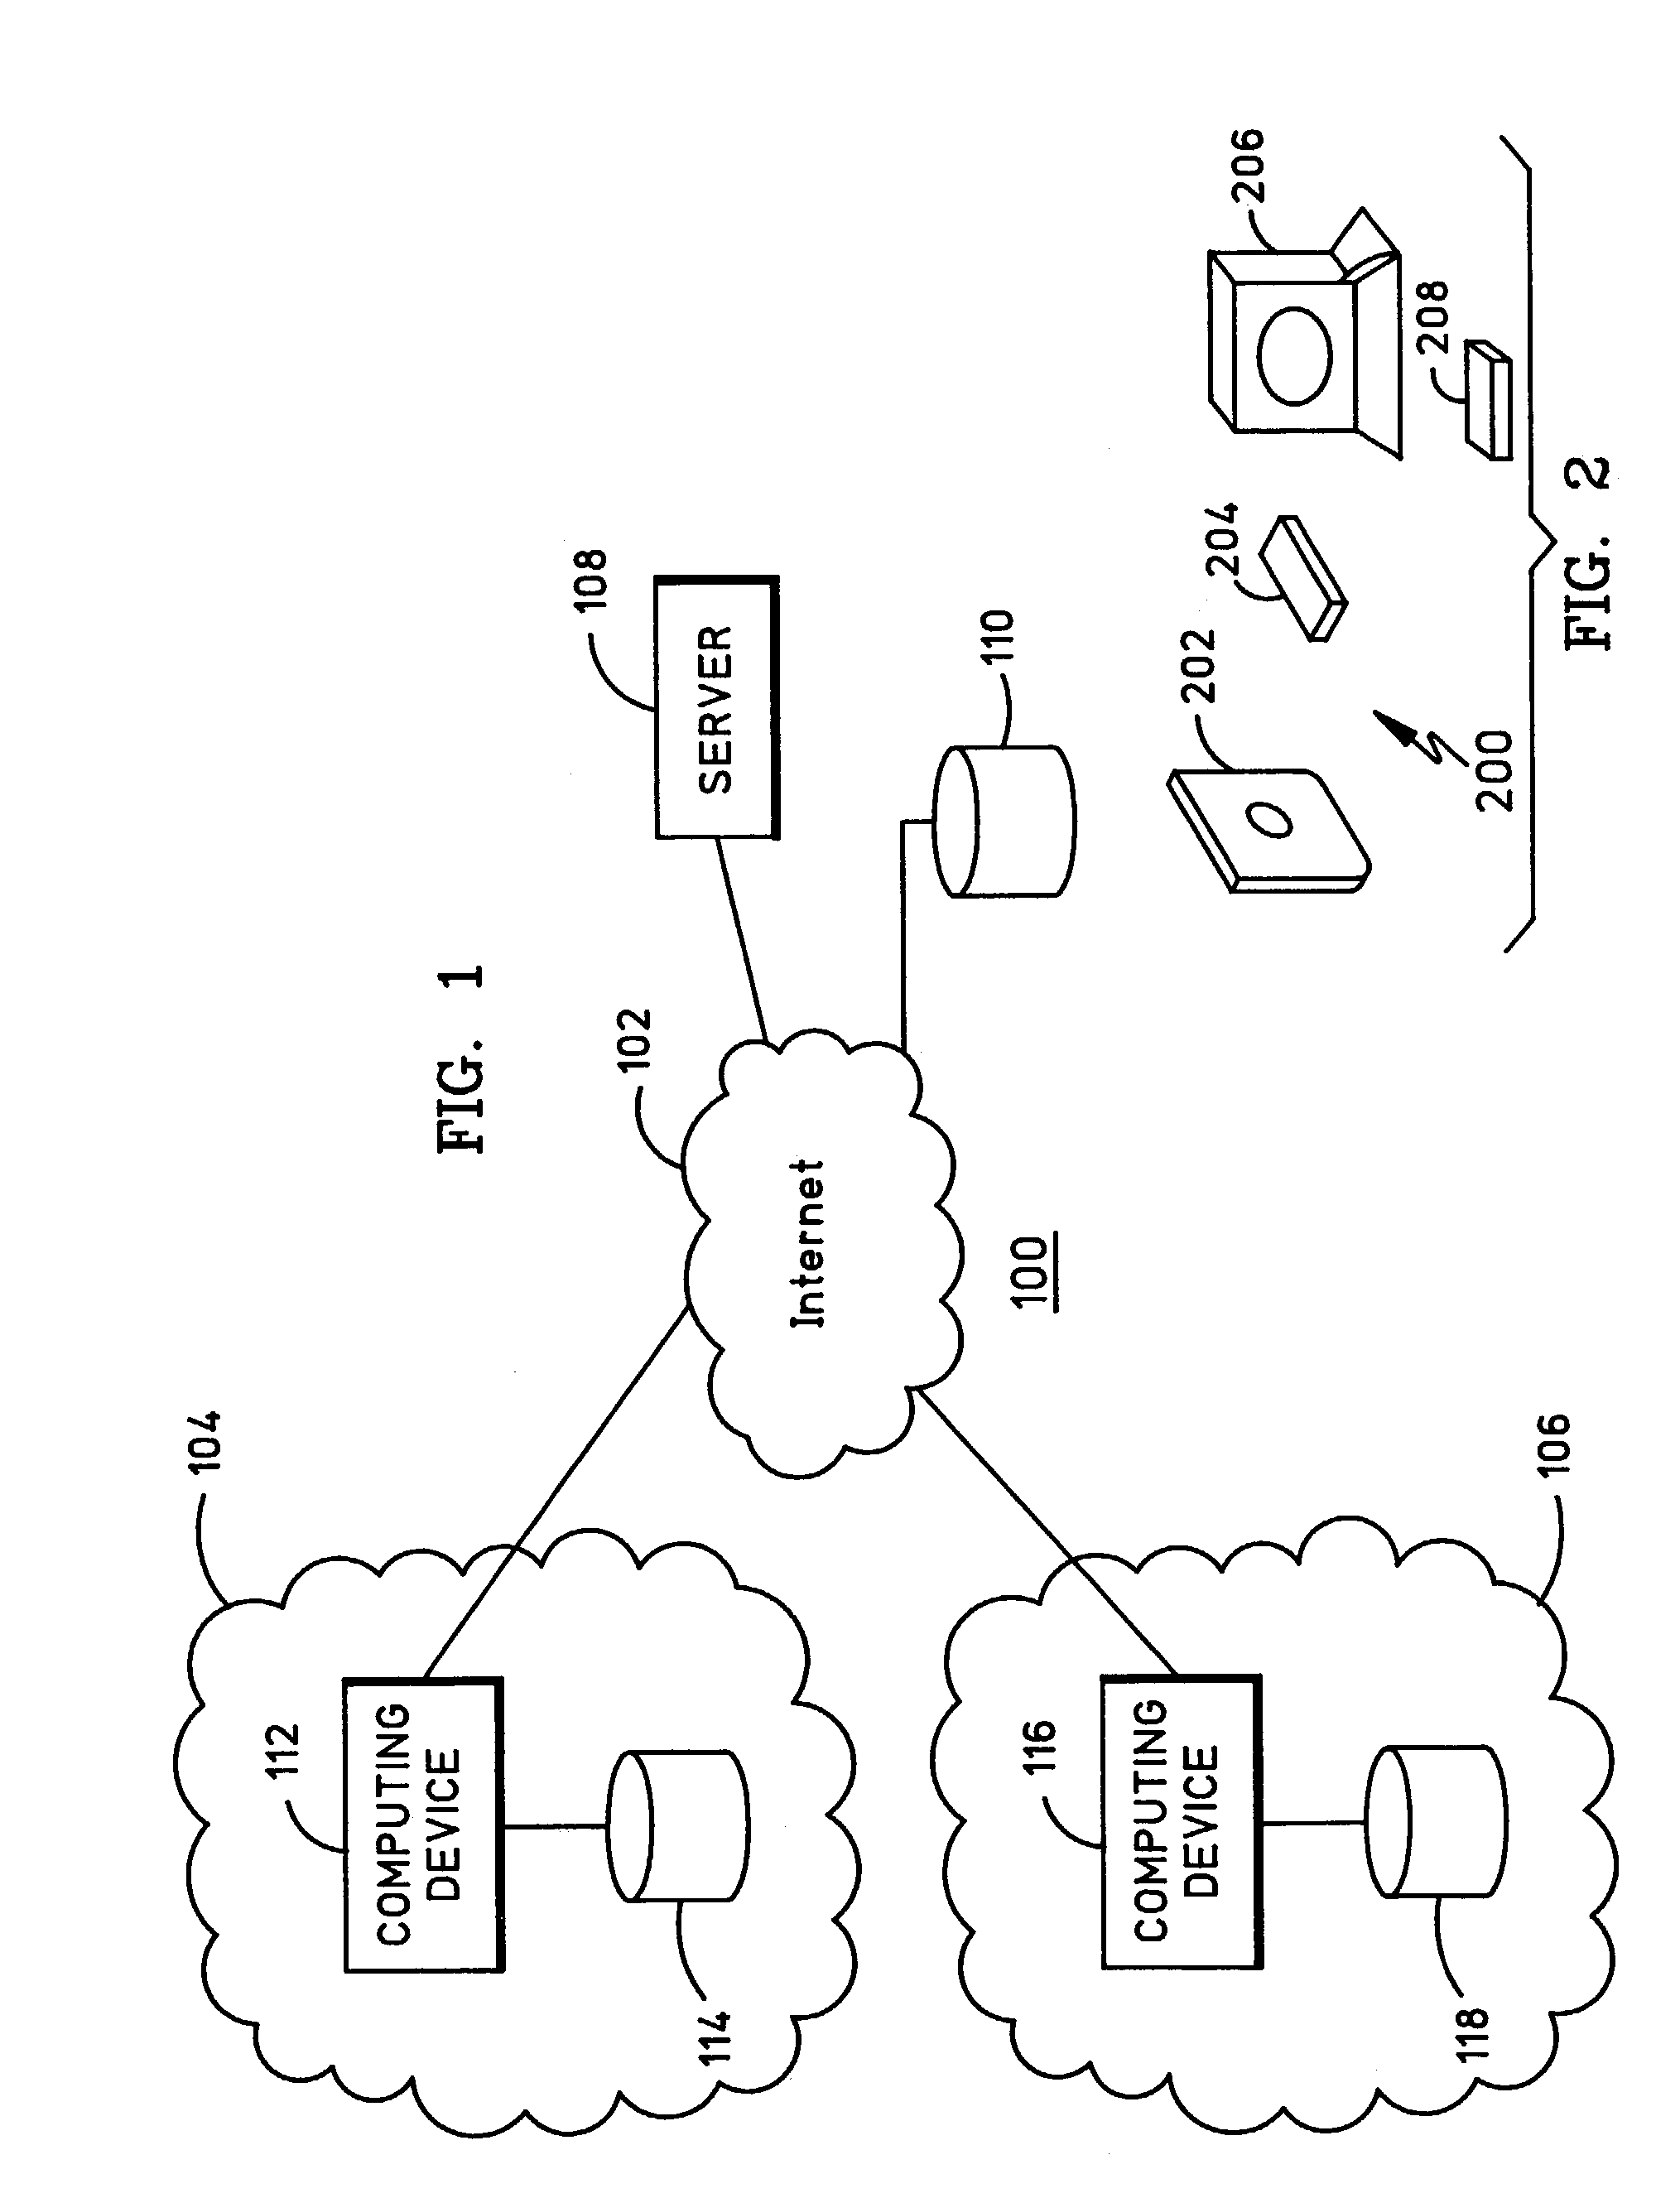 Efficient methods and apparatus for high-throughput processing of gene sequence data